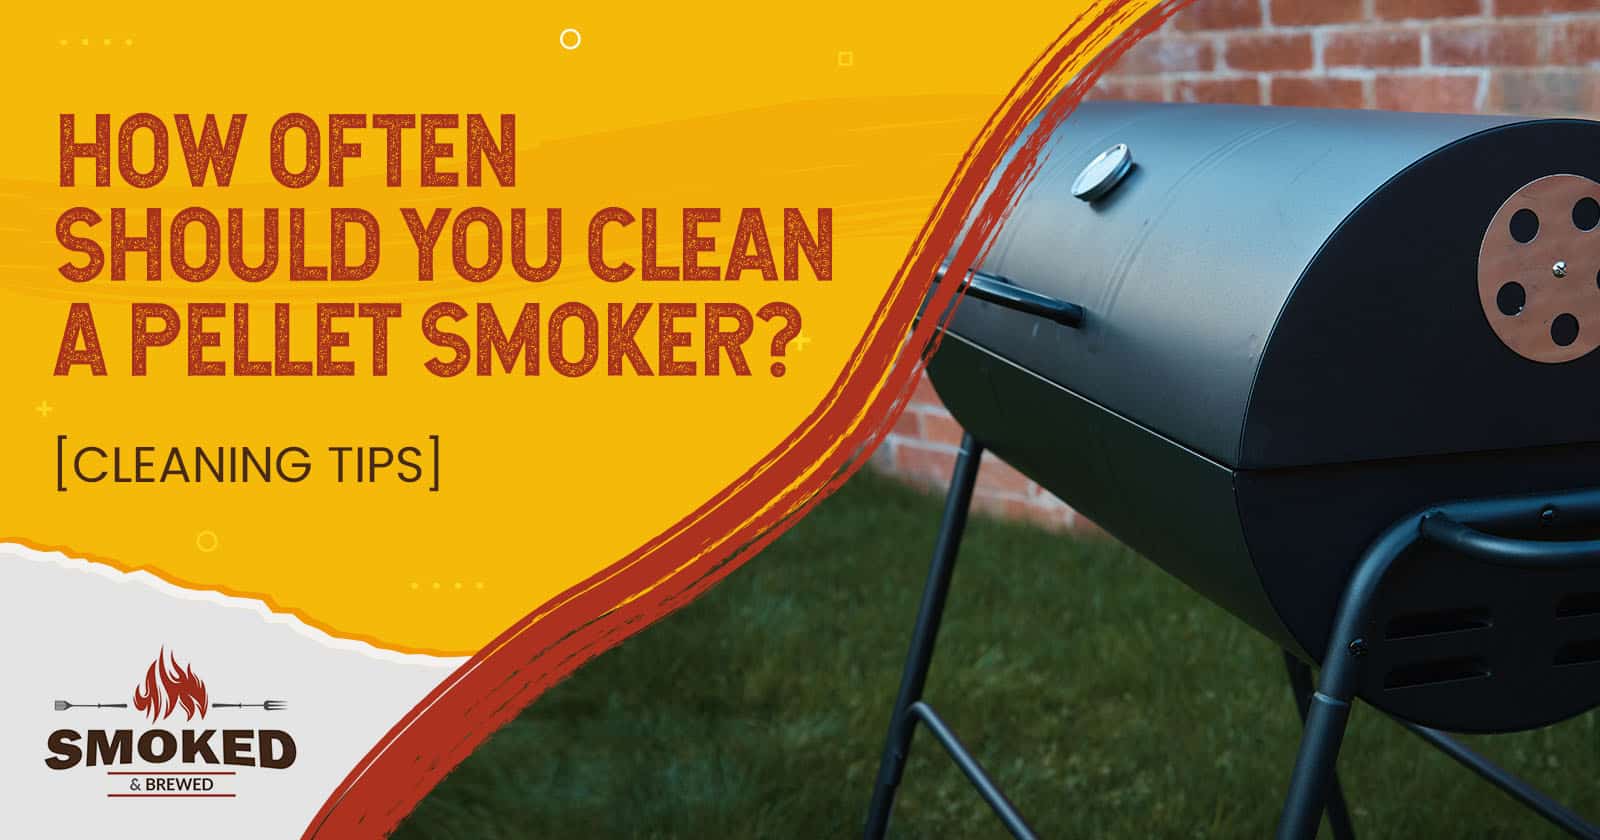 How Often Should You Clean A Pellet Smoker?